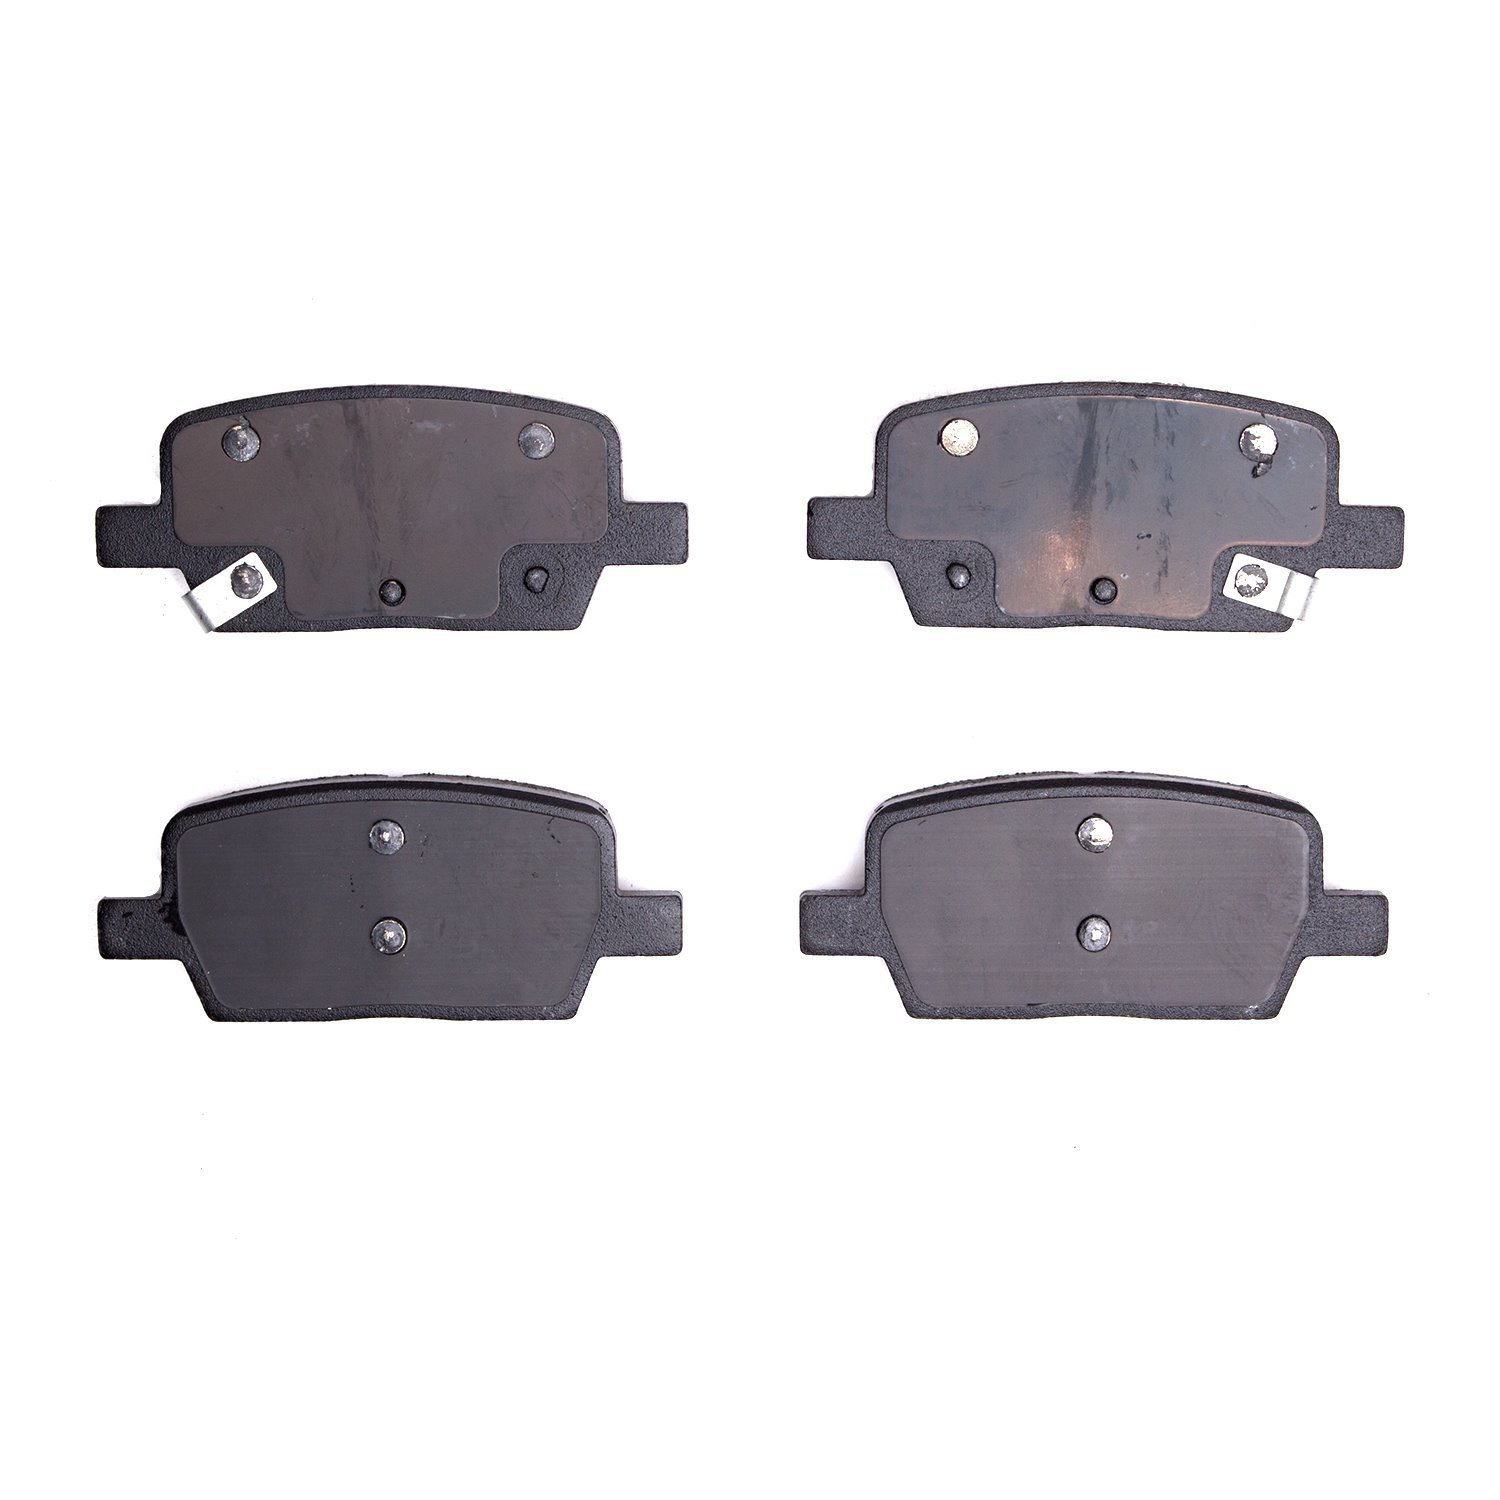 1600-1914-00 5000 Euro Ceramic Brake Pads, Fits Select GM, Position: Rear